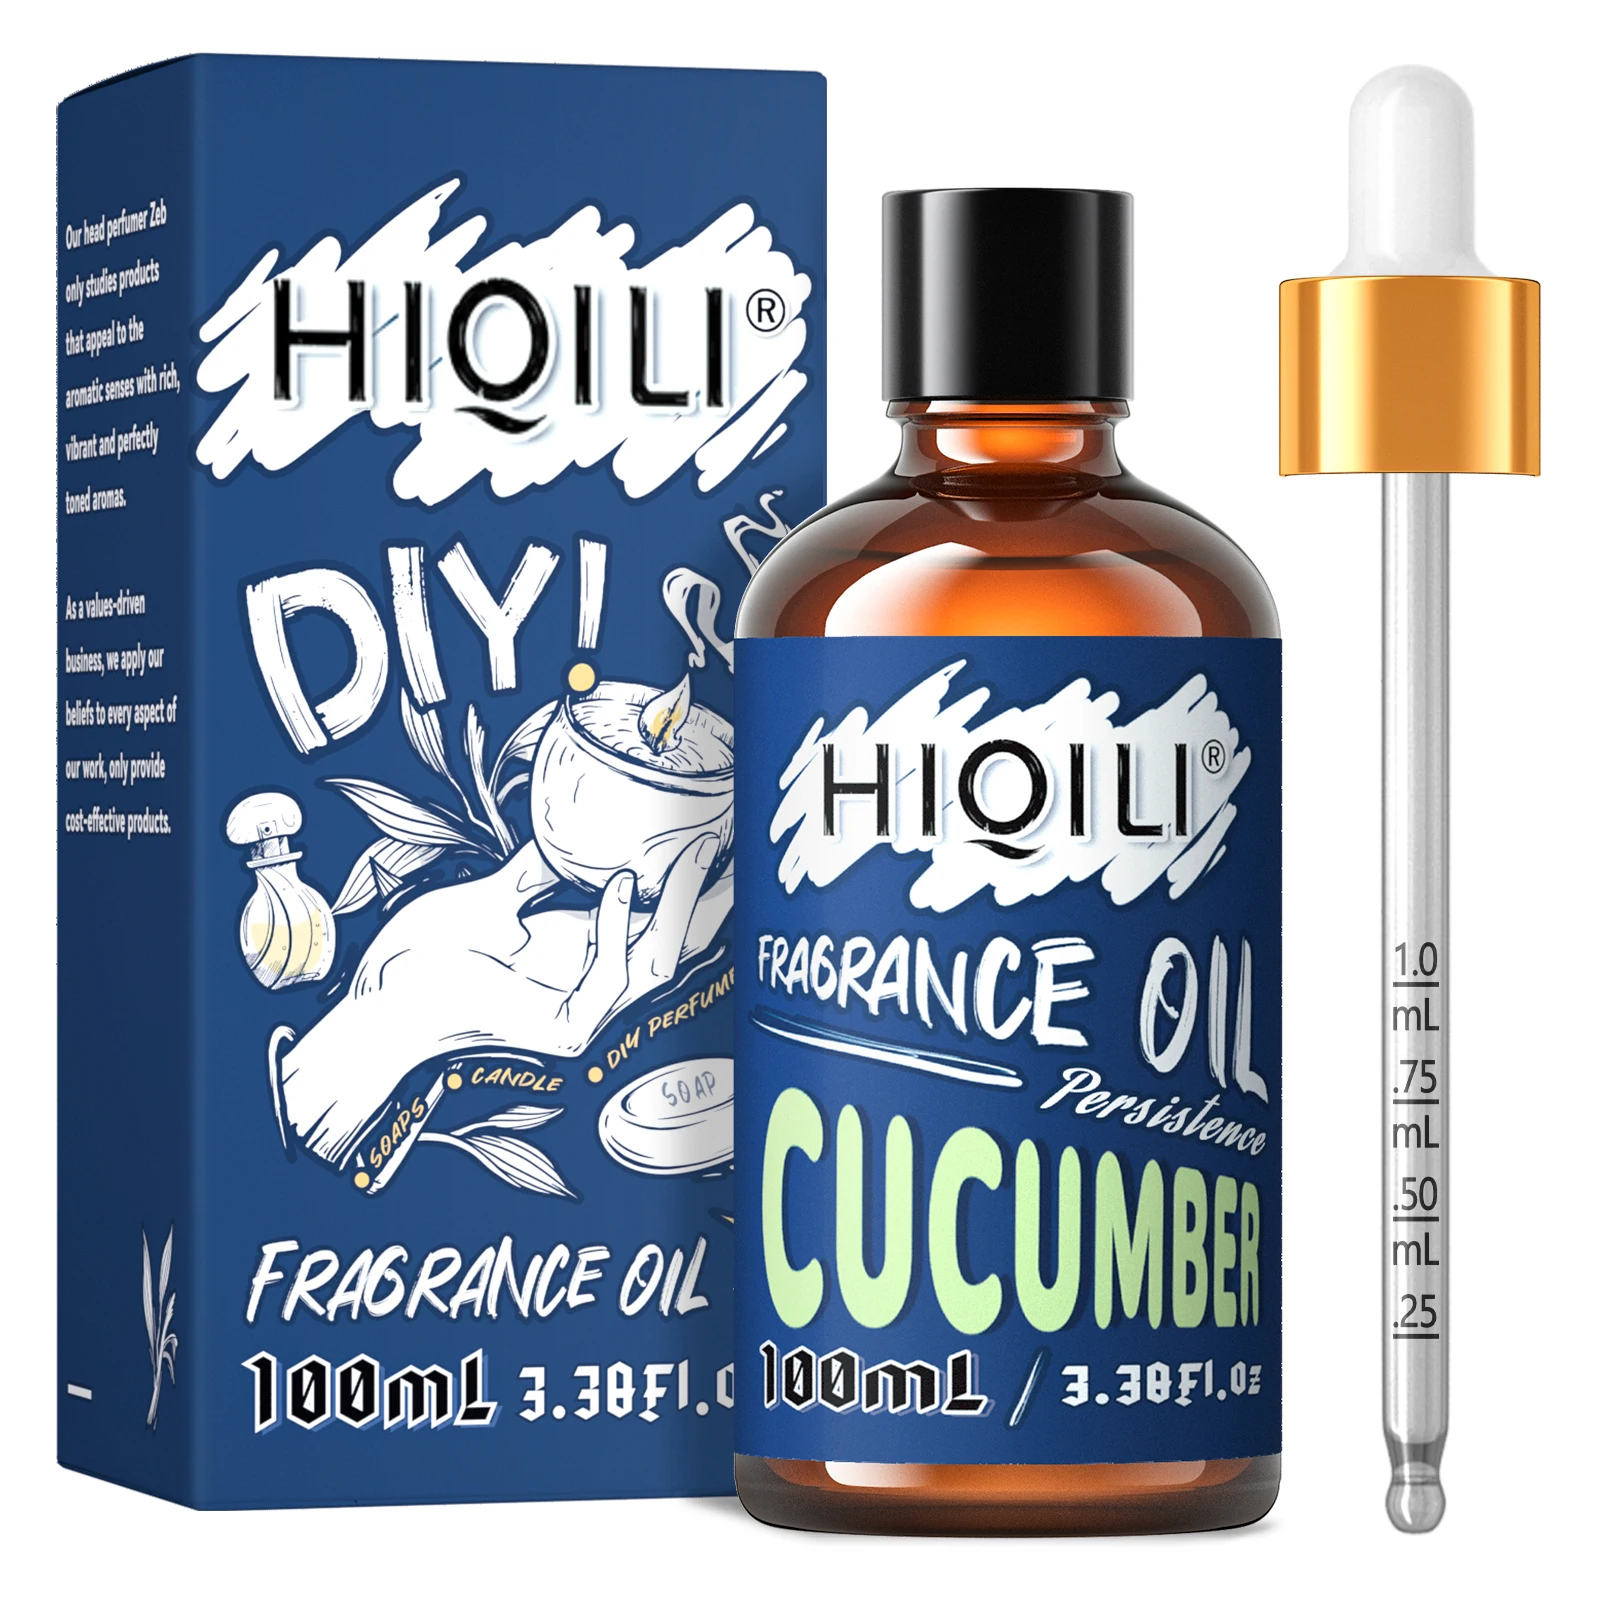 HIQILI 100ML Cucumber Oil, 100% Pure Oil for Aromatherapy,Car Diffuser, Humidifier,Candle Making, Soap Making, Massage and Gift hiqili 100ml ylang ylang essential oils for diffuser humidifier massage aromatherapy aromatic oil for candle soap making